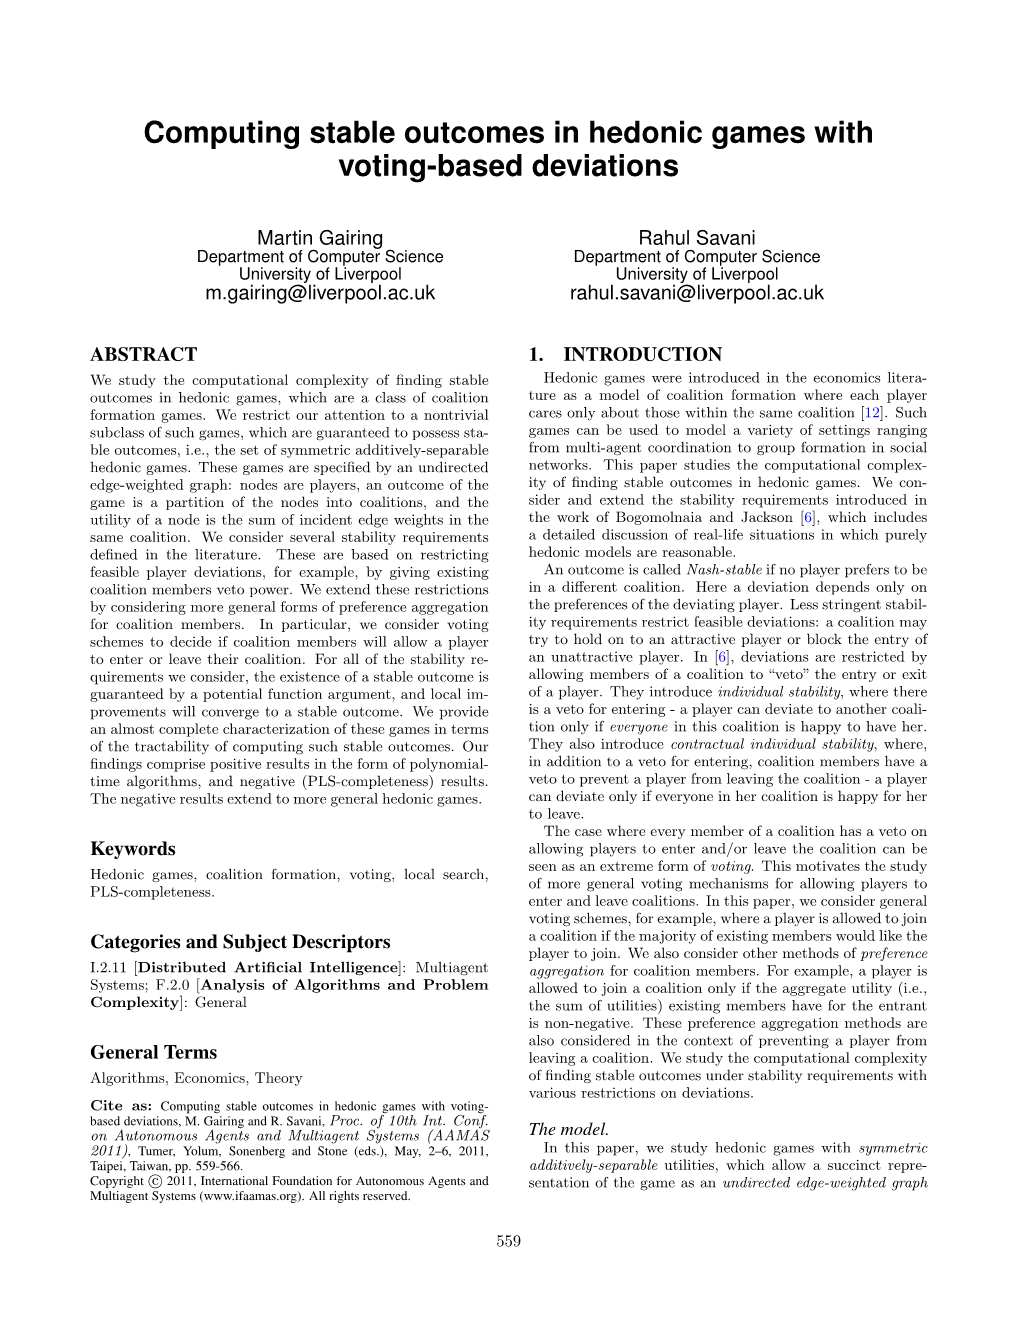 Computing Stable Outcomes in Hedonic Games with Voting-Based Deviations